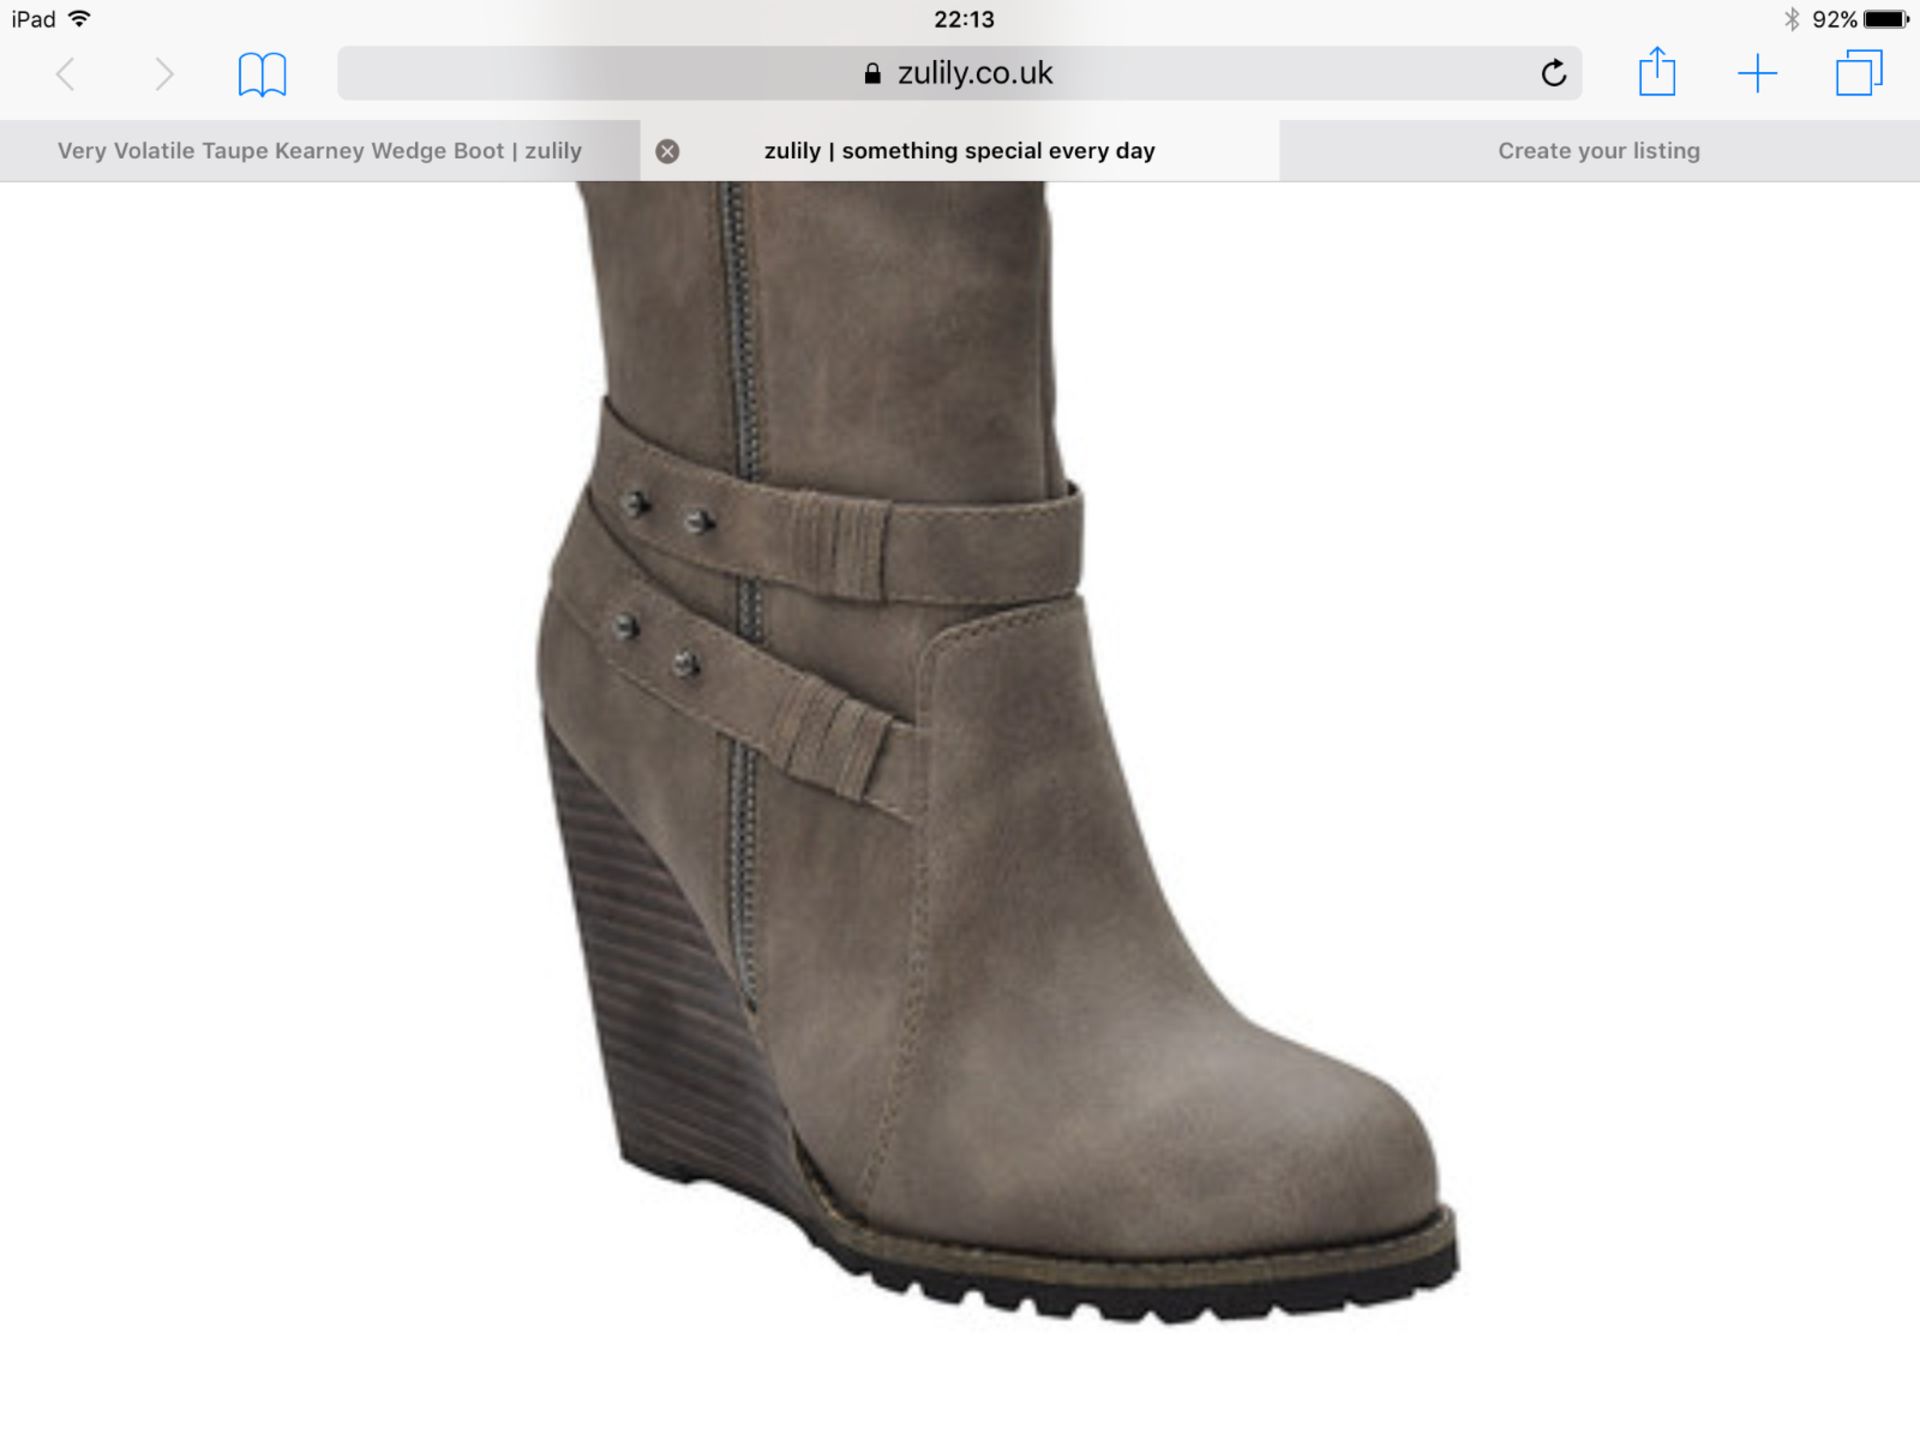 Very Volatile Taupe Kearney Wedge Boot, Size Eur 39, RRP £100.99 (New with box) [Ref: H-003] - Image 2 of 4